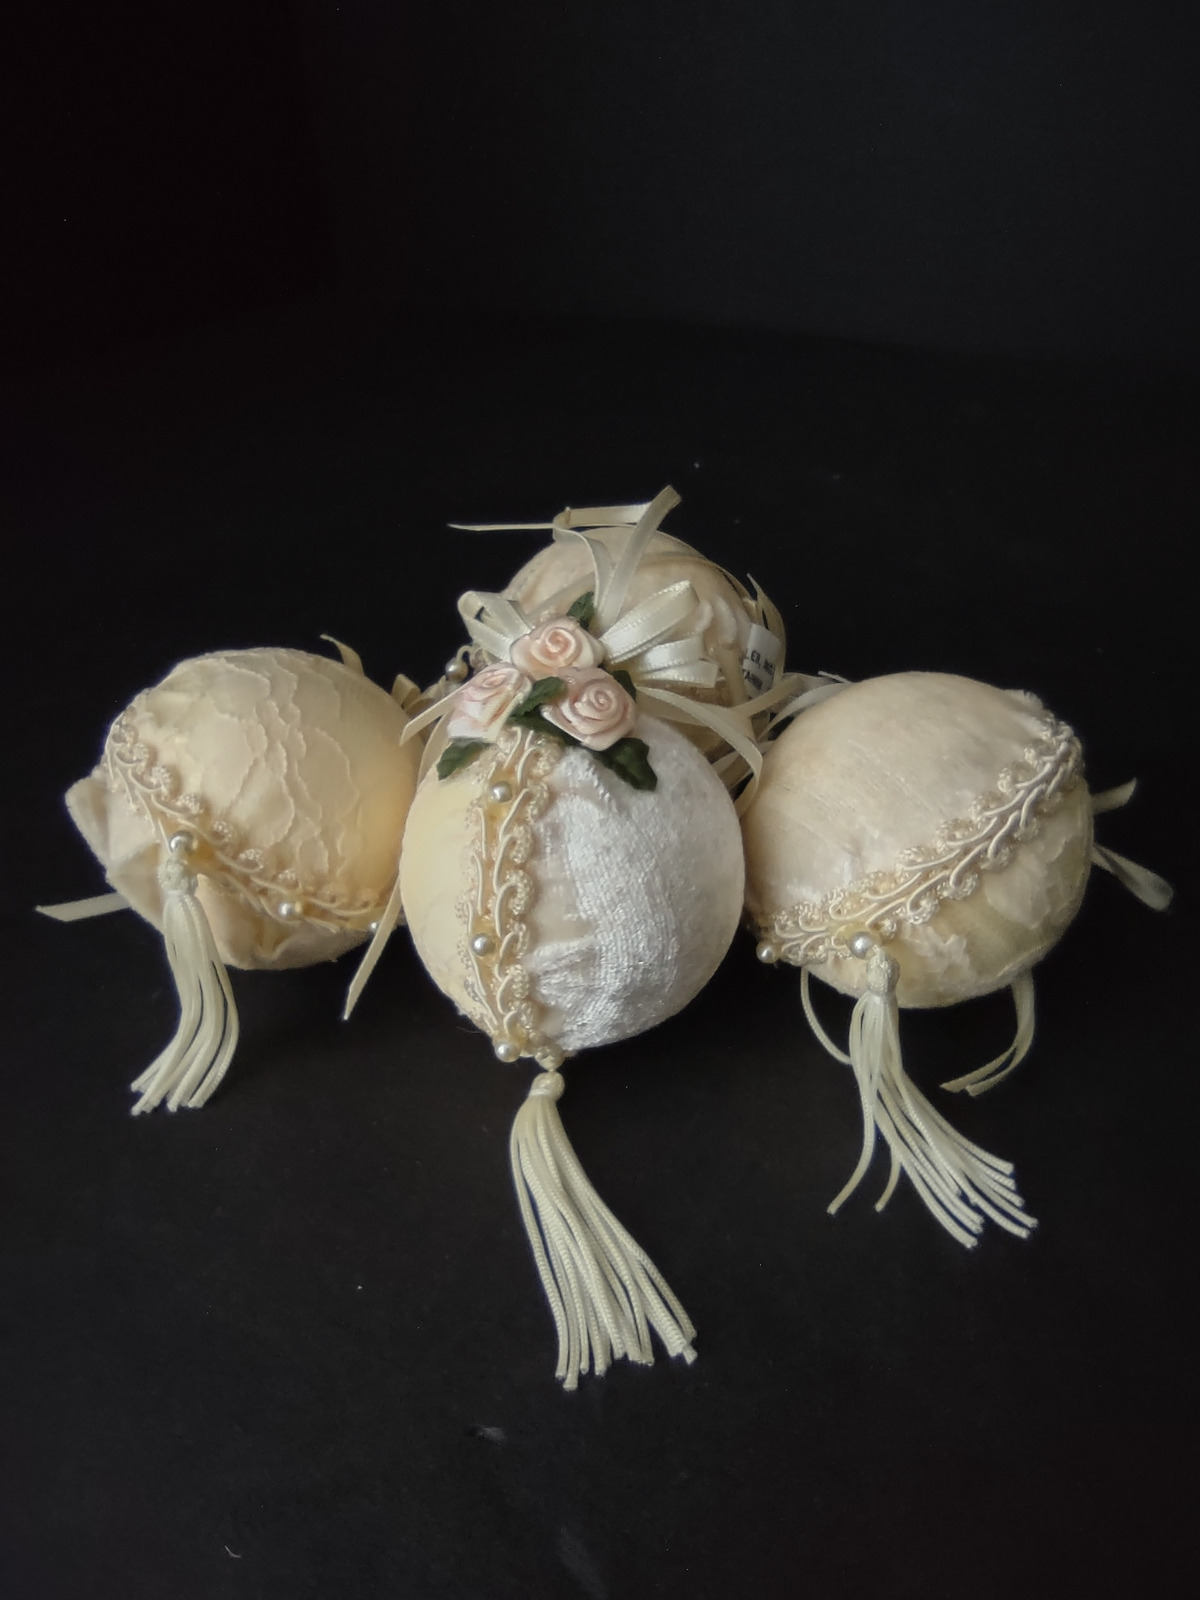 4 x Victorian Shabby Chic Ivory Lace Pearl Rose Christmas Ball Ornament lot 1206